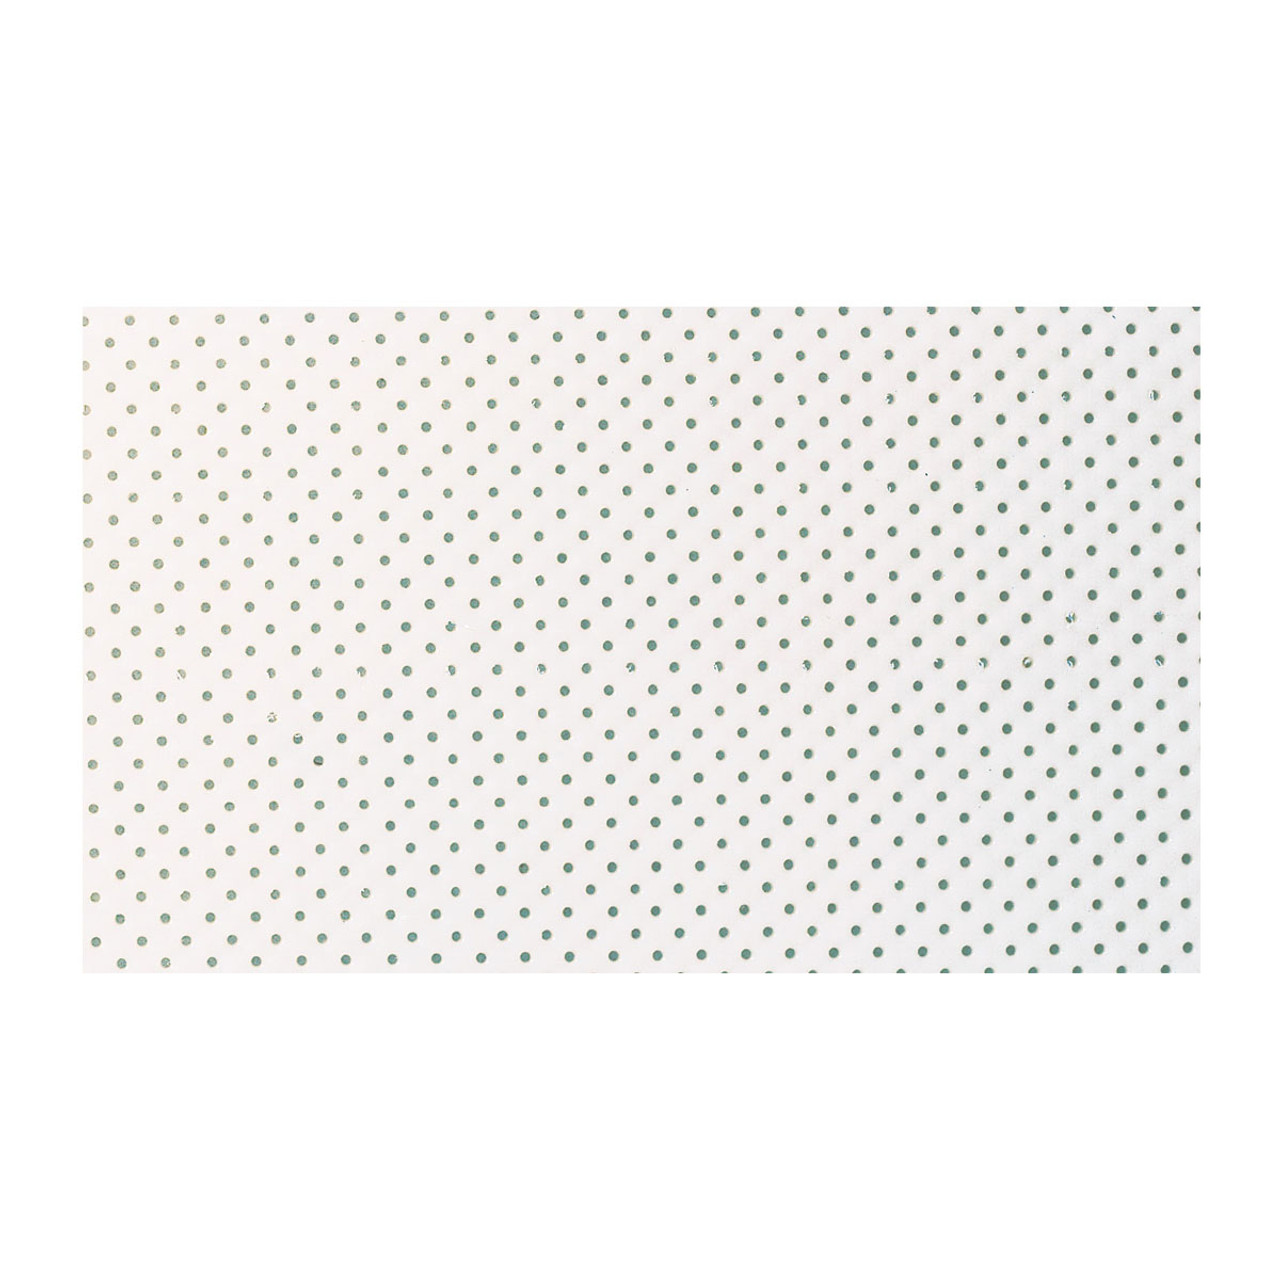 Orfit¨ Natural NS Soft, 18" x 24" x 1/16", micro perforated 13%